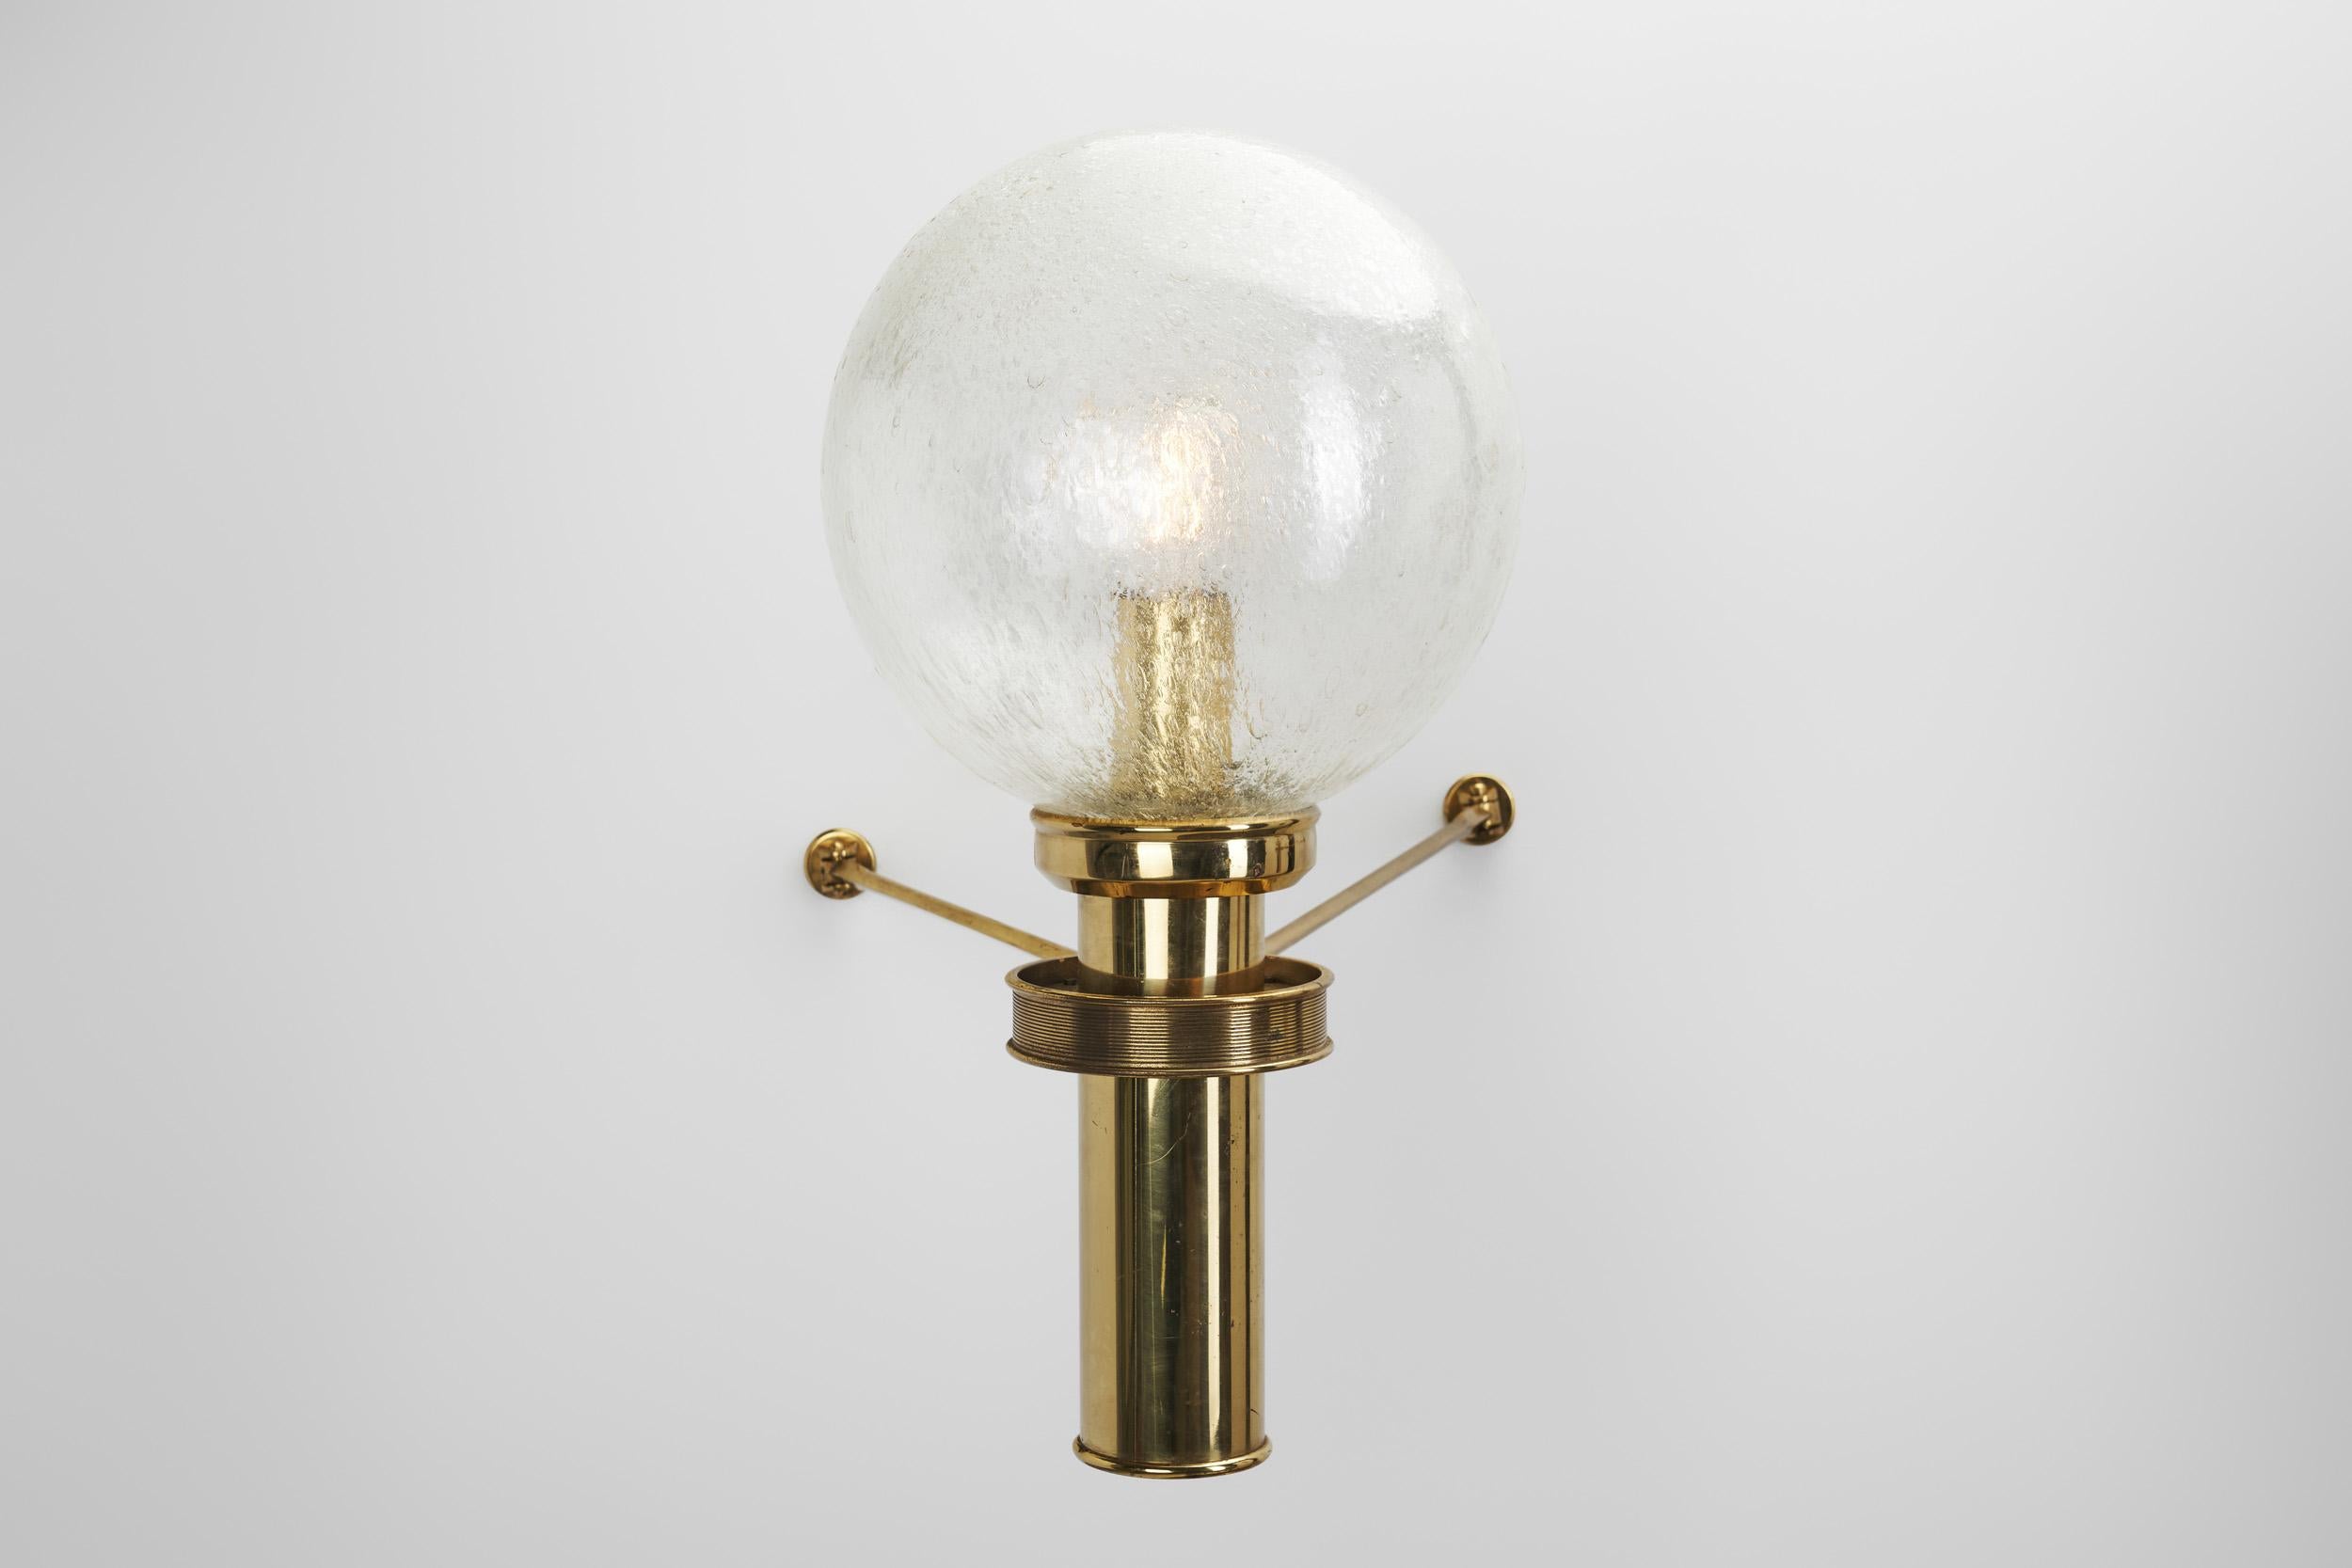 Large European Modern Wall Sconces in Brass & Bubble Glass, Europe, circa 1950s For Sale 2